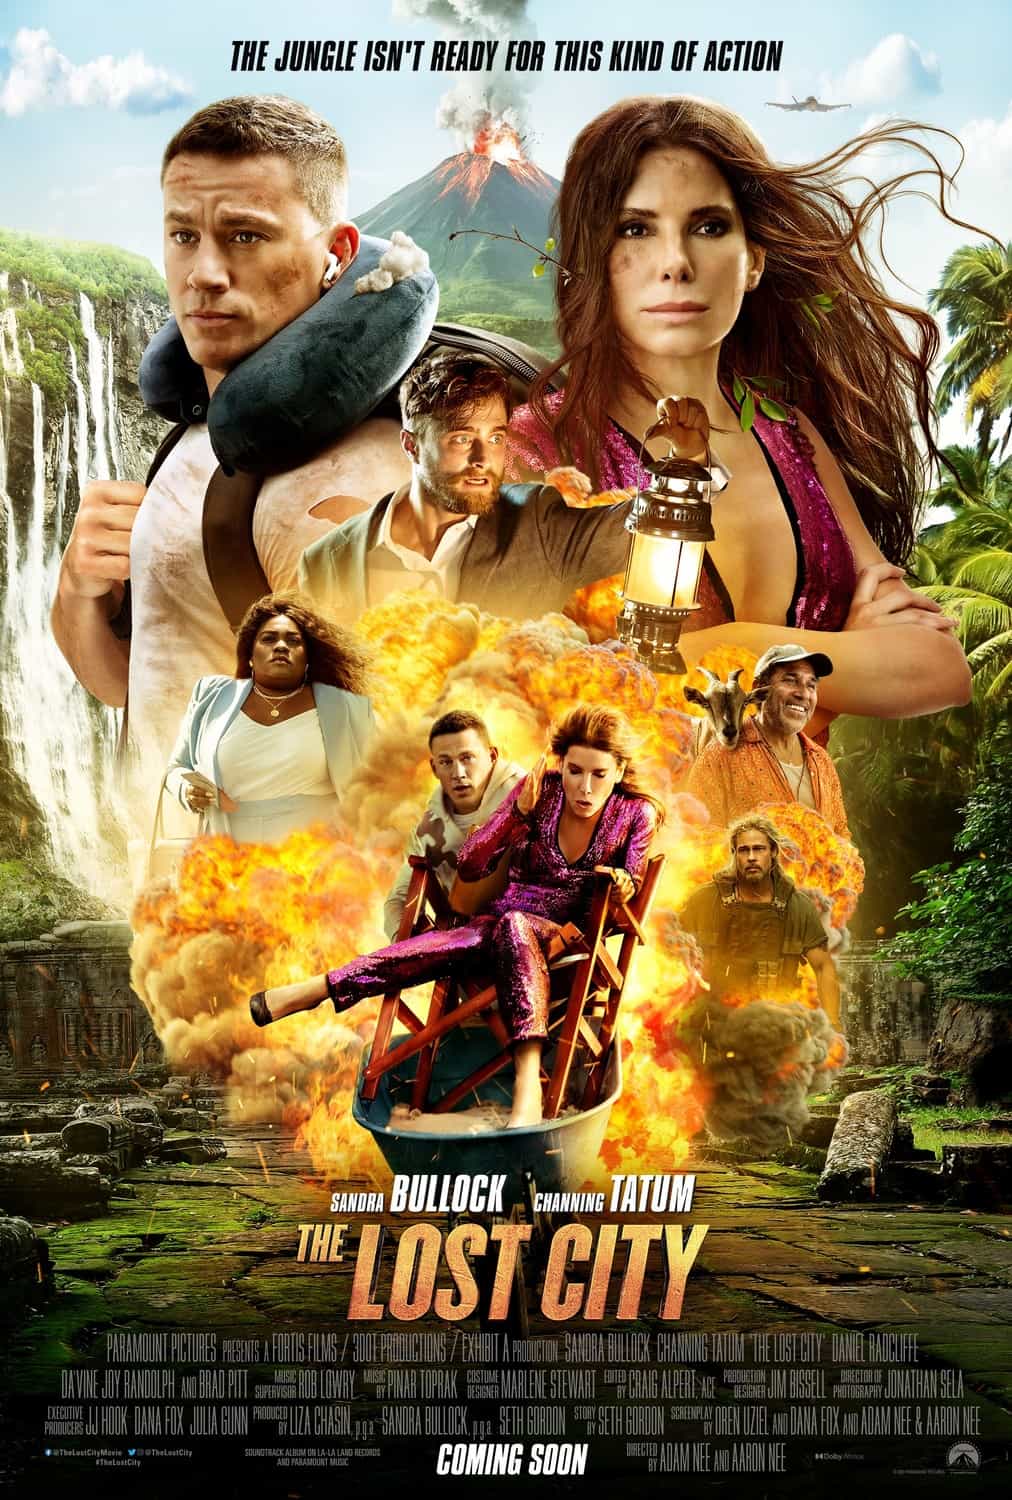 New poster released for The Lost City which stars Sandra Bullock - the movie is released 25th March 2022 #thelostcity
